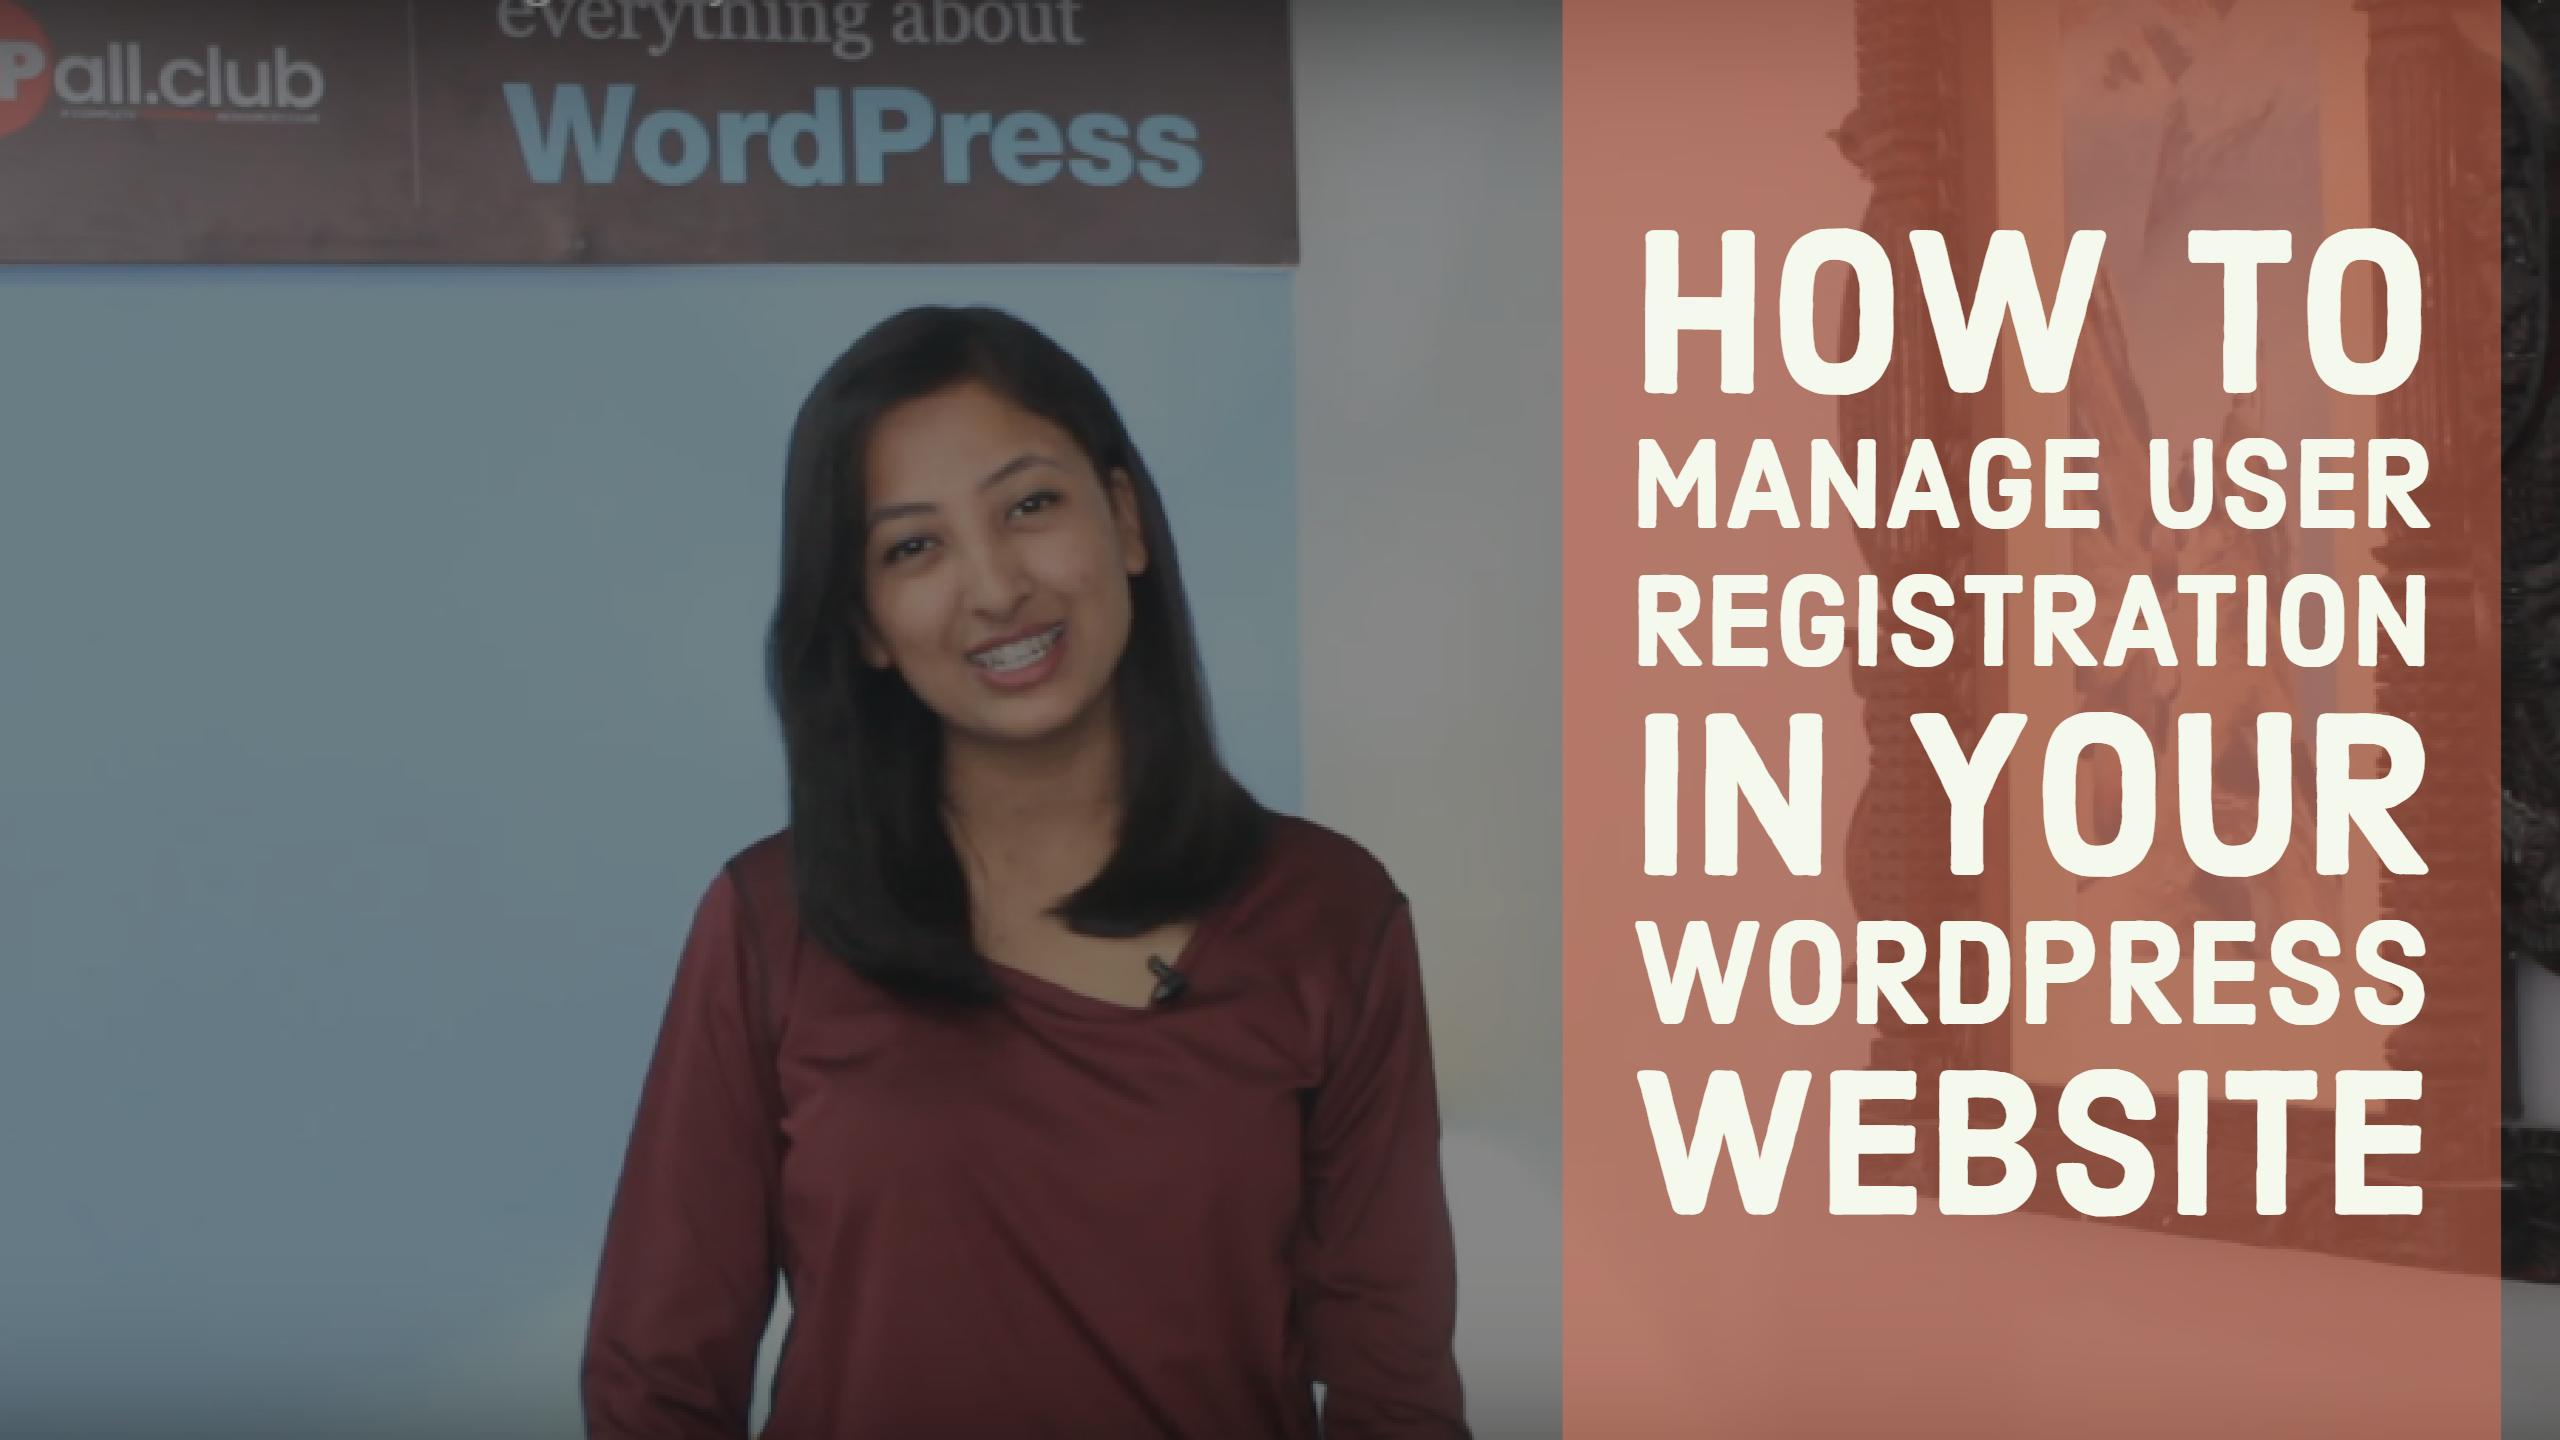 How to manage user registration in your WordPress Website